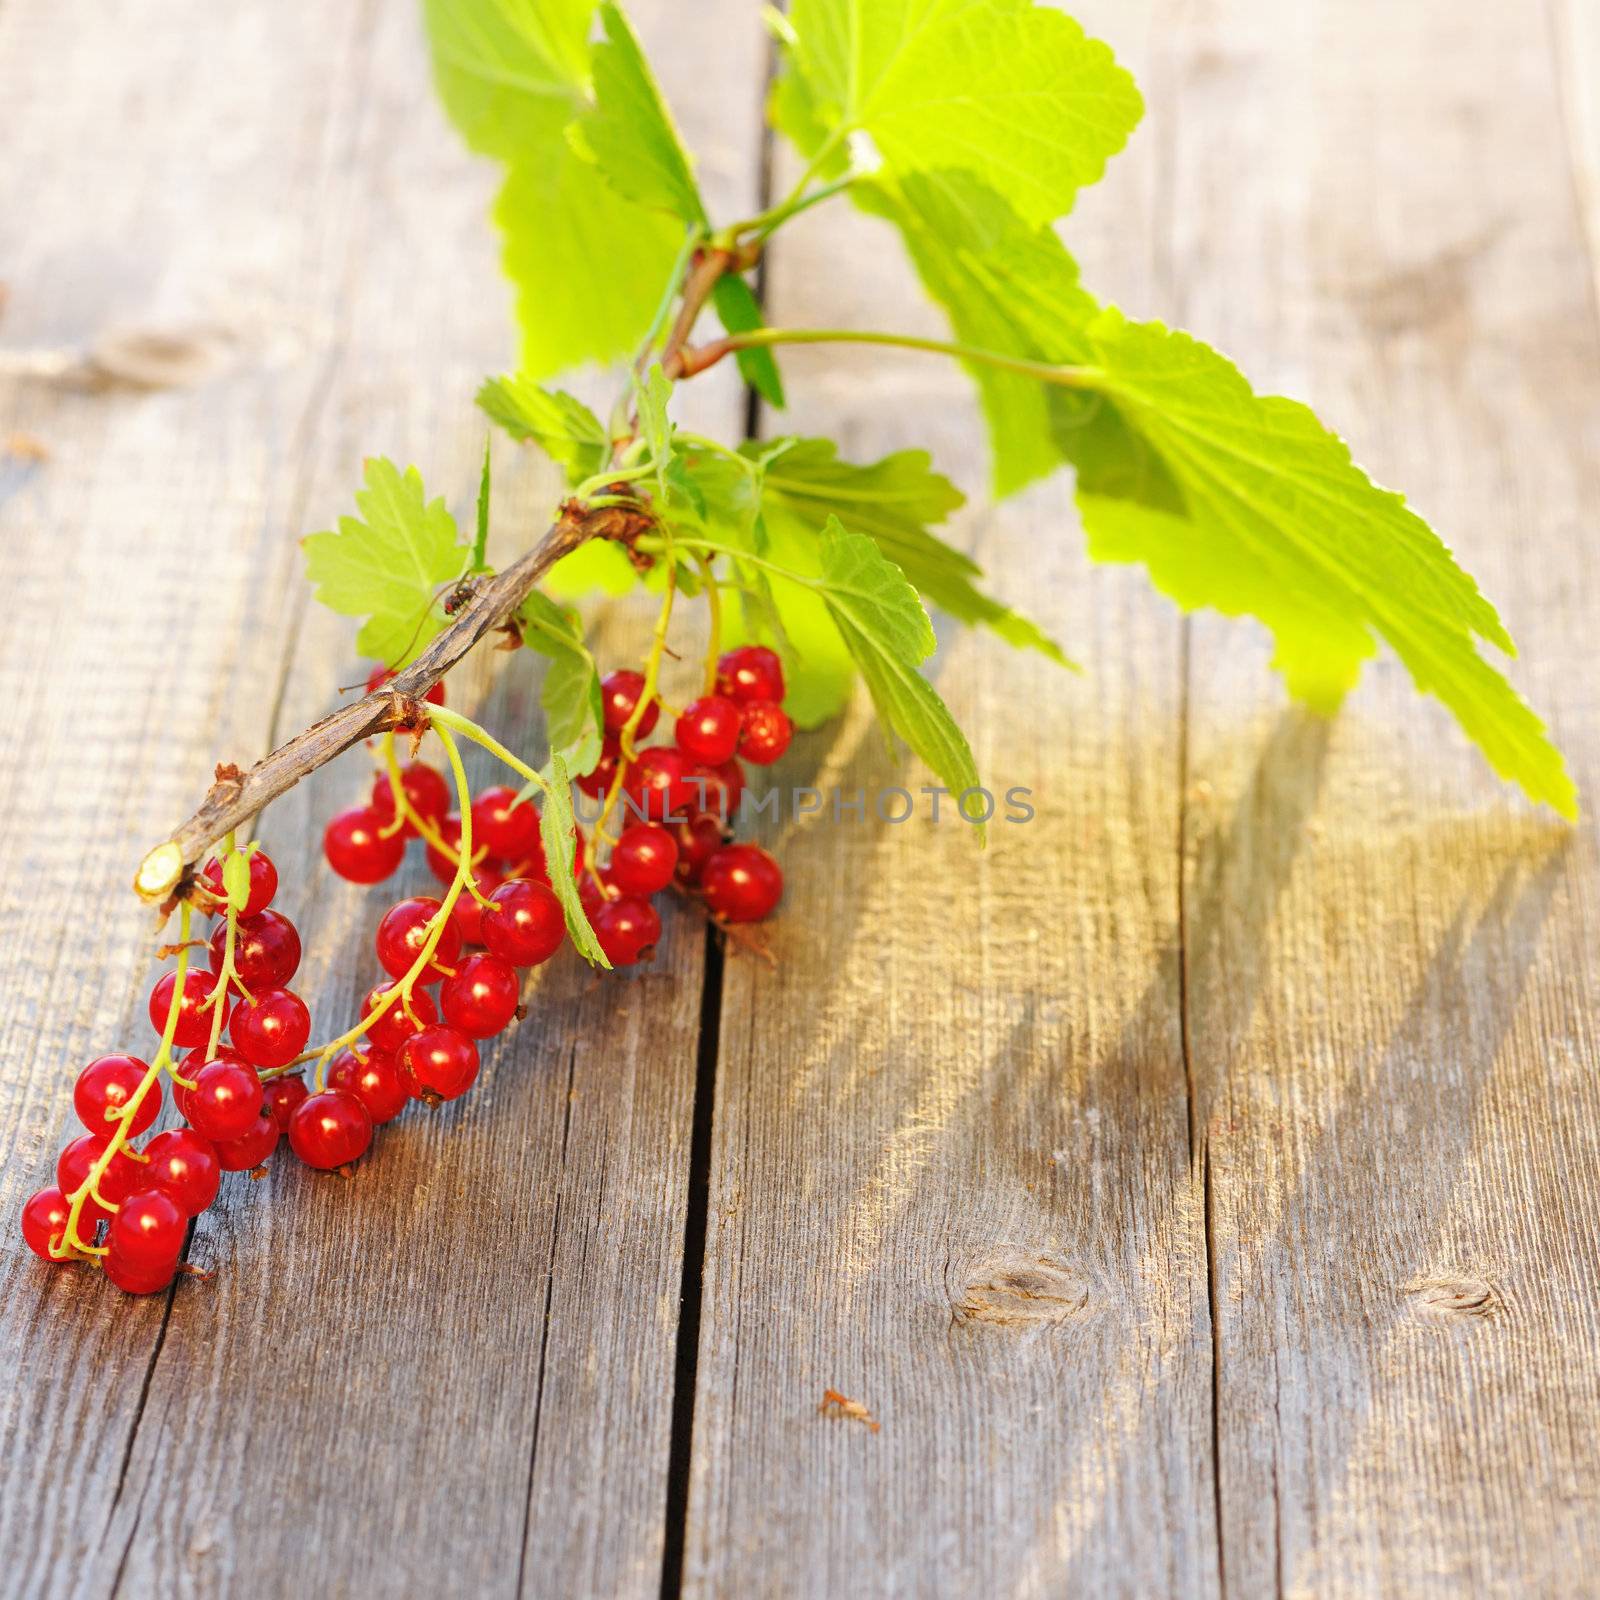 Redcurrant with leafs on wooden table